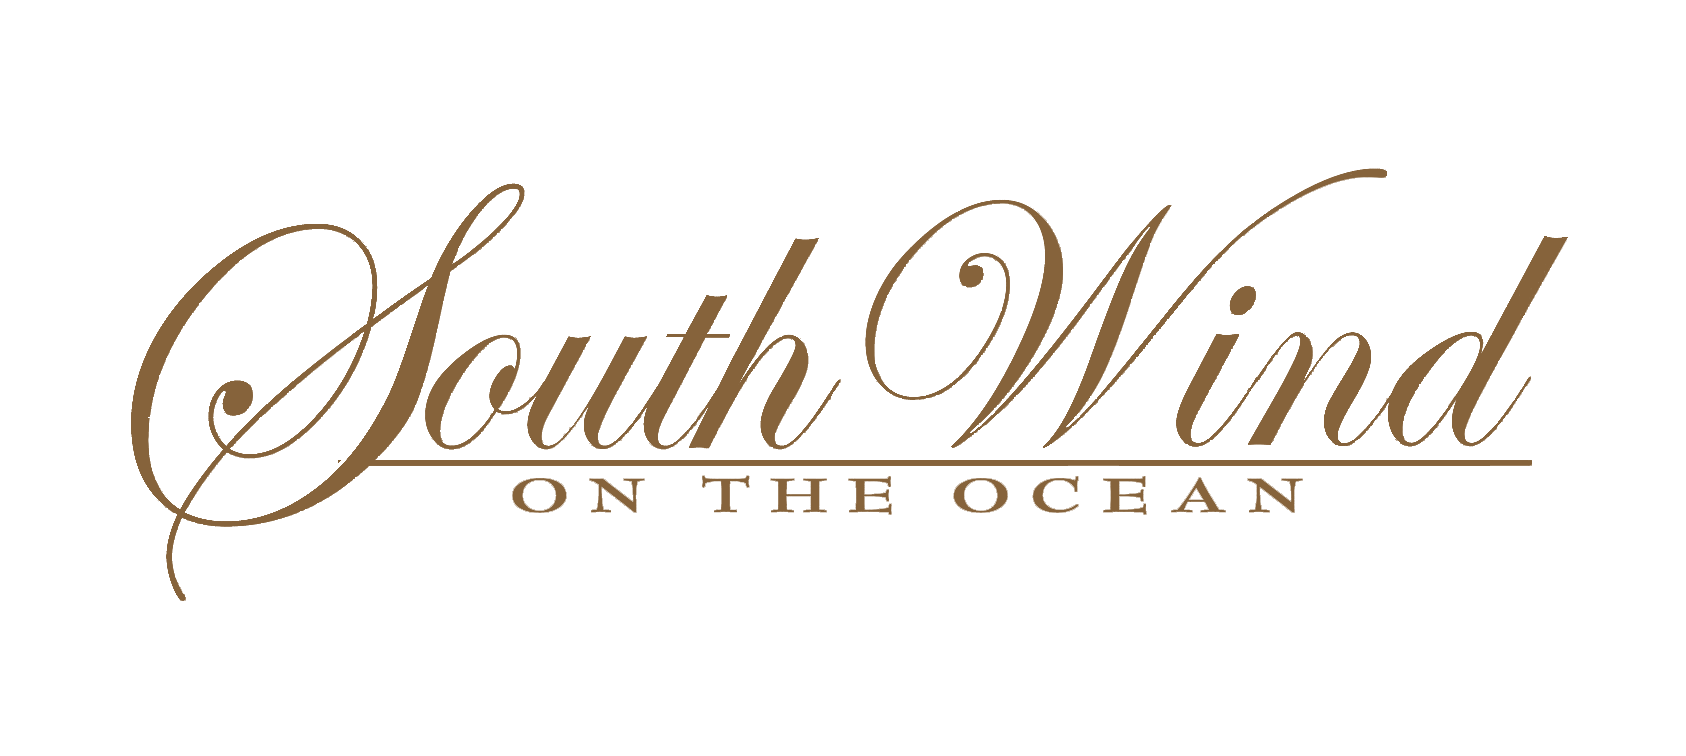 The South Wind Logo